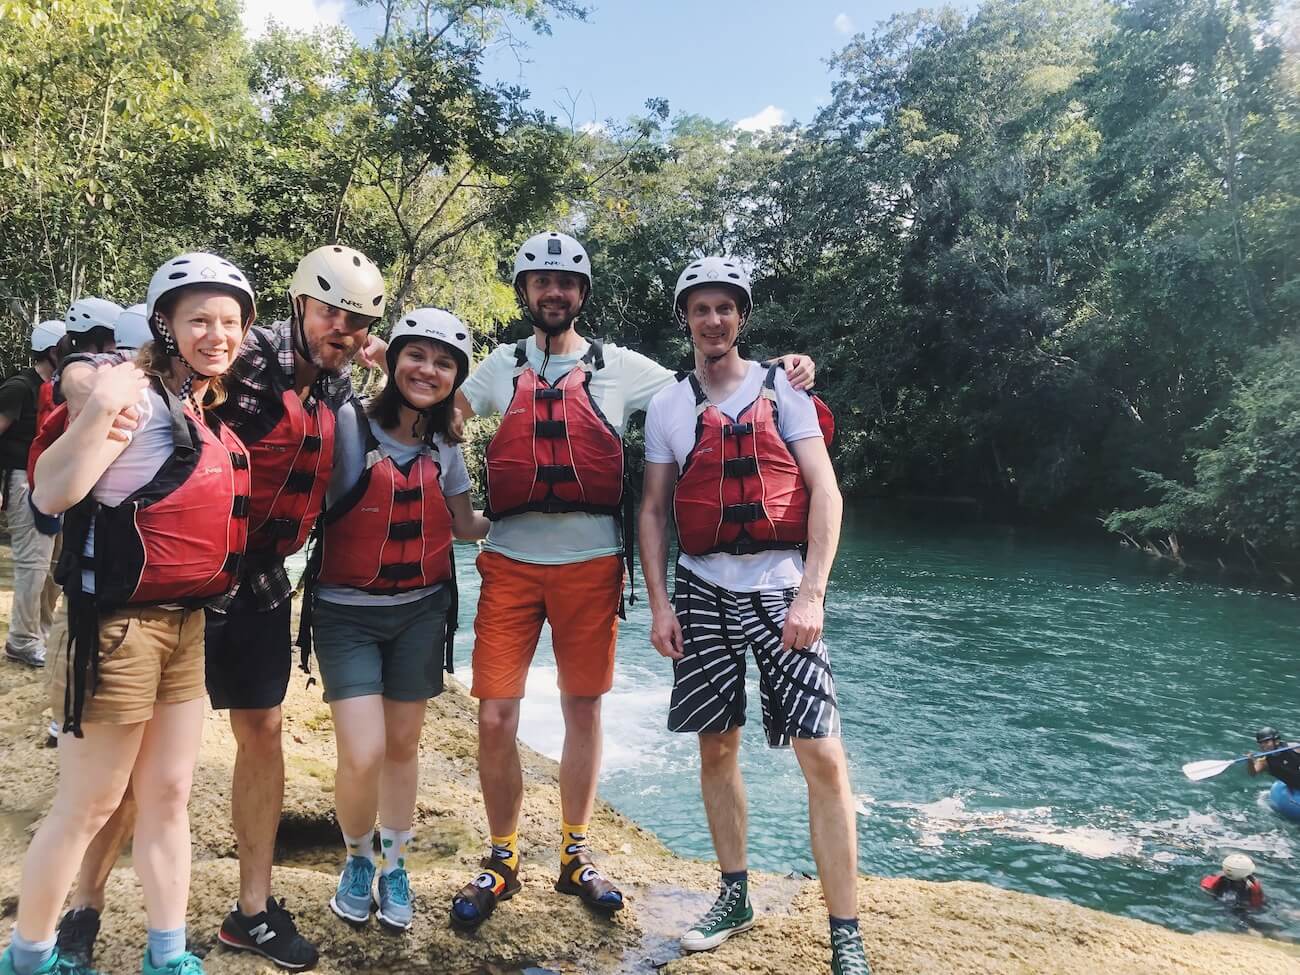 Rafting in Mexico